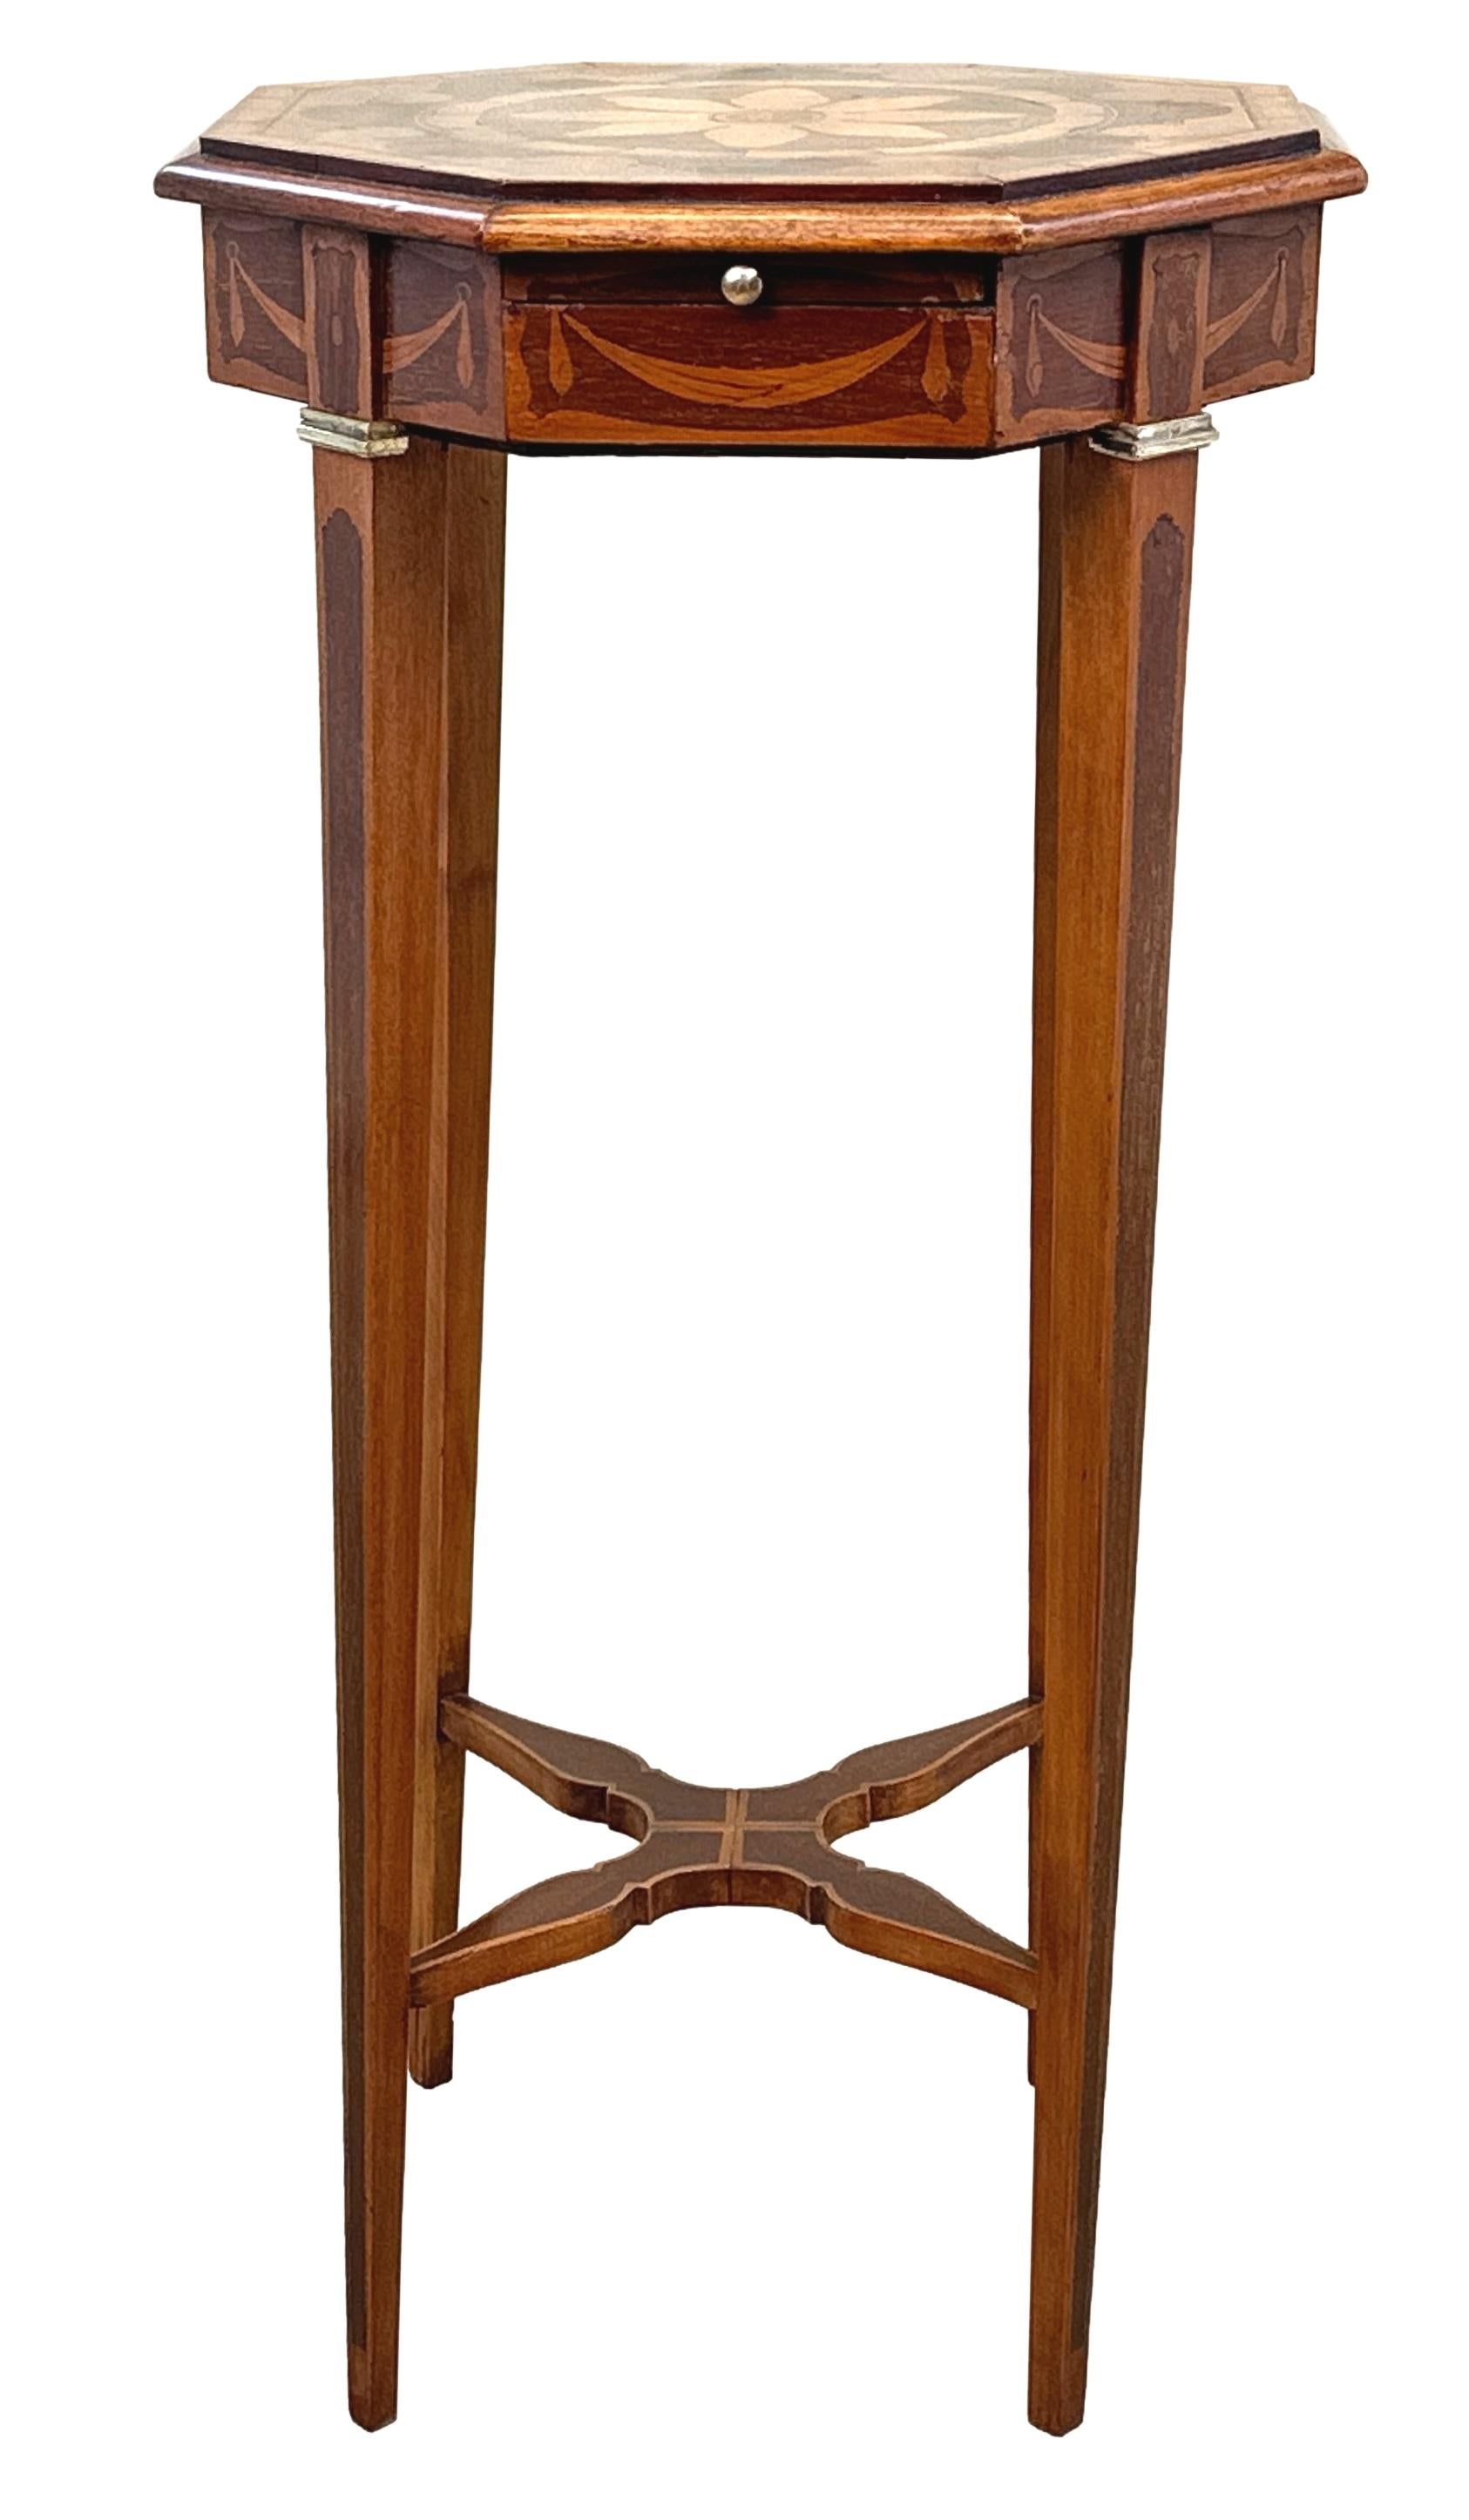 Octagonal Late 19th Century Mahogany & Satinwood Occasional Table For Sale 3